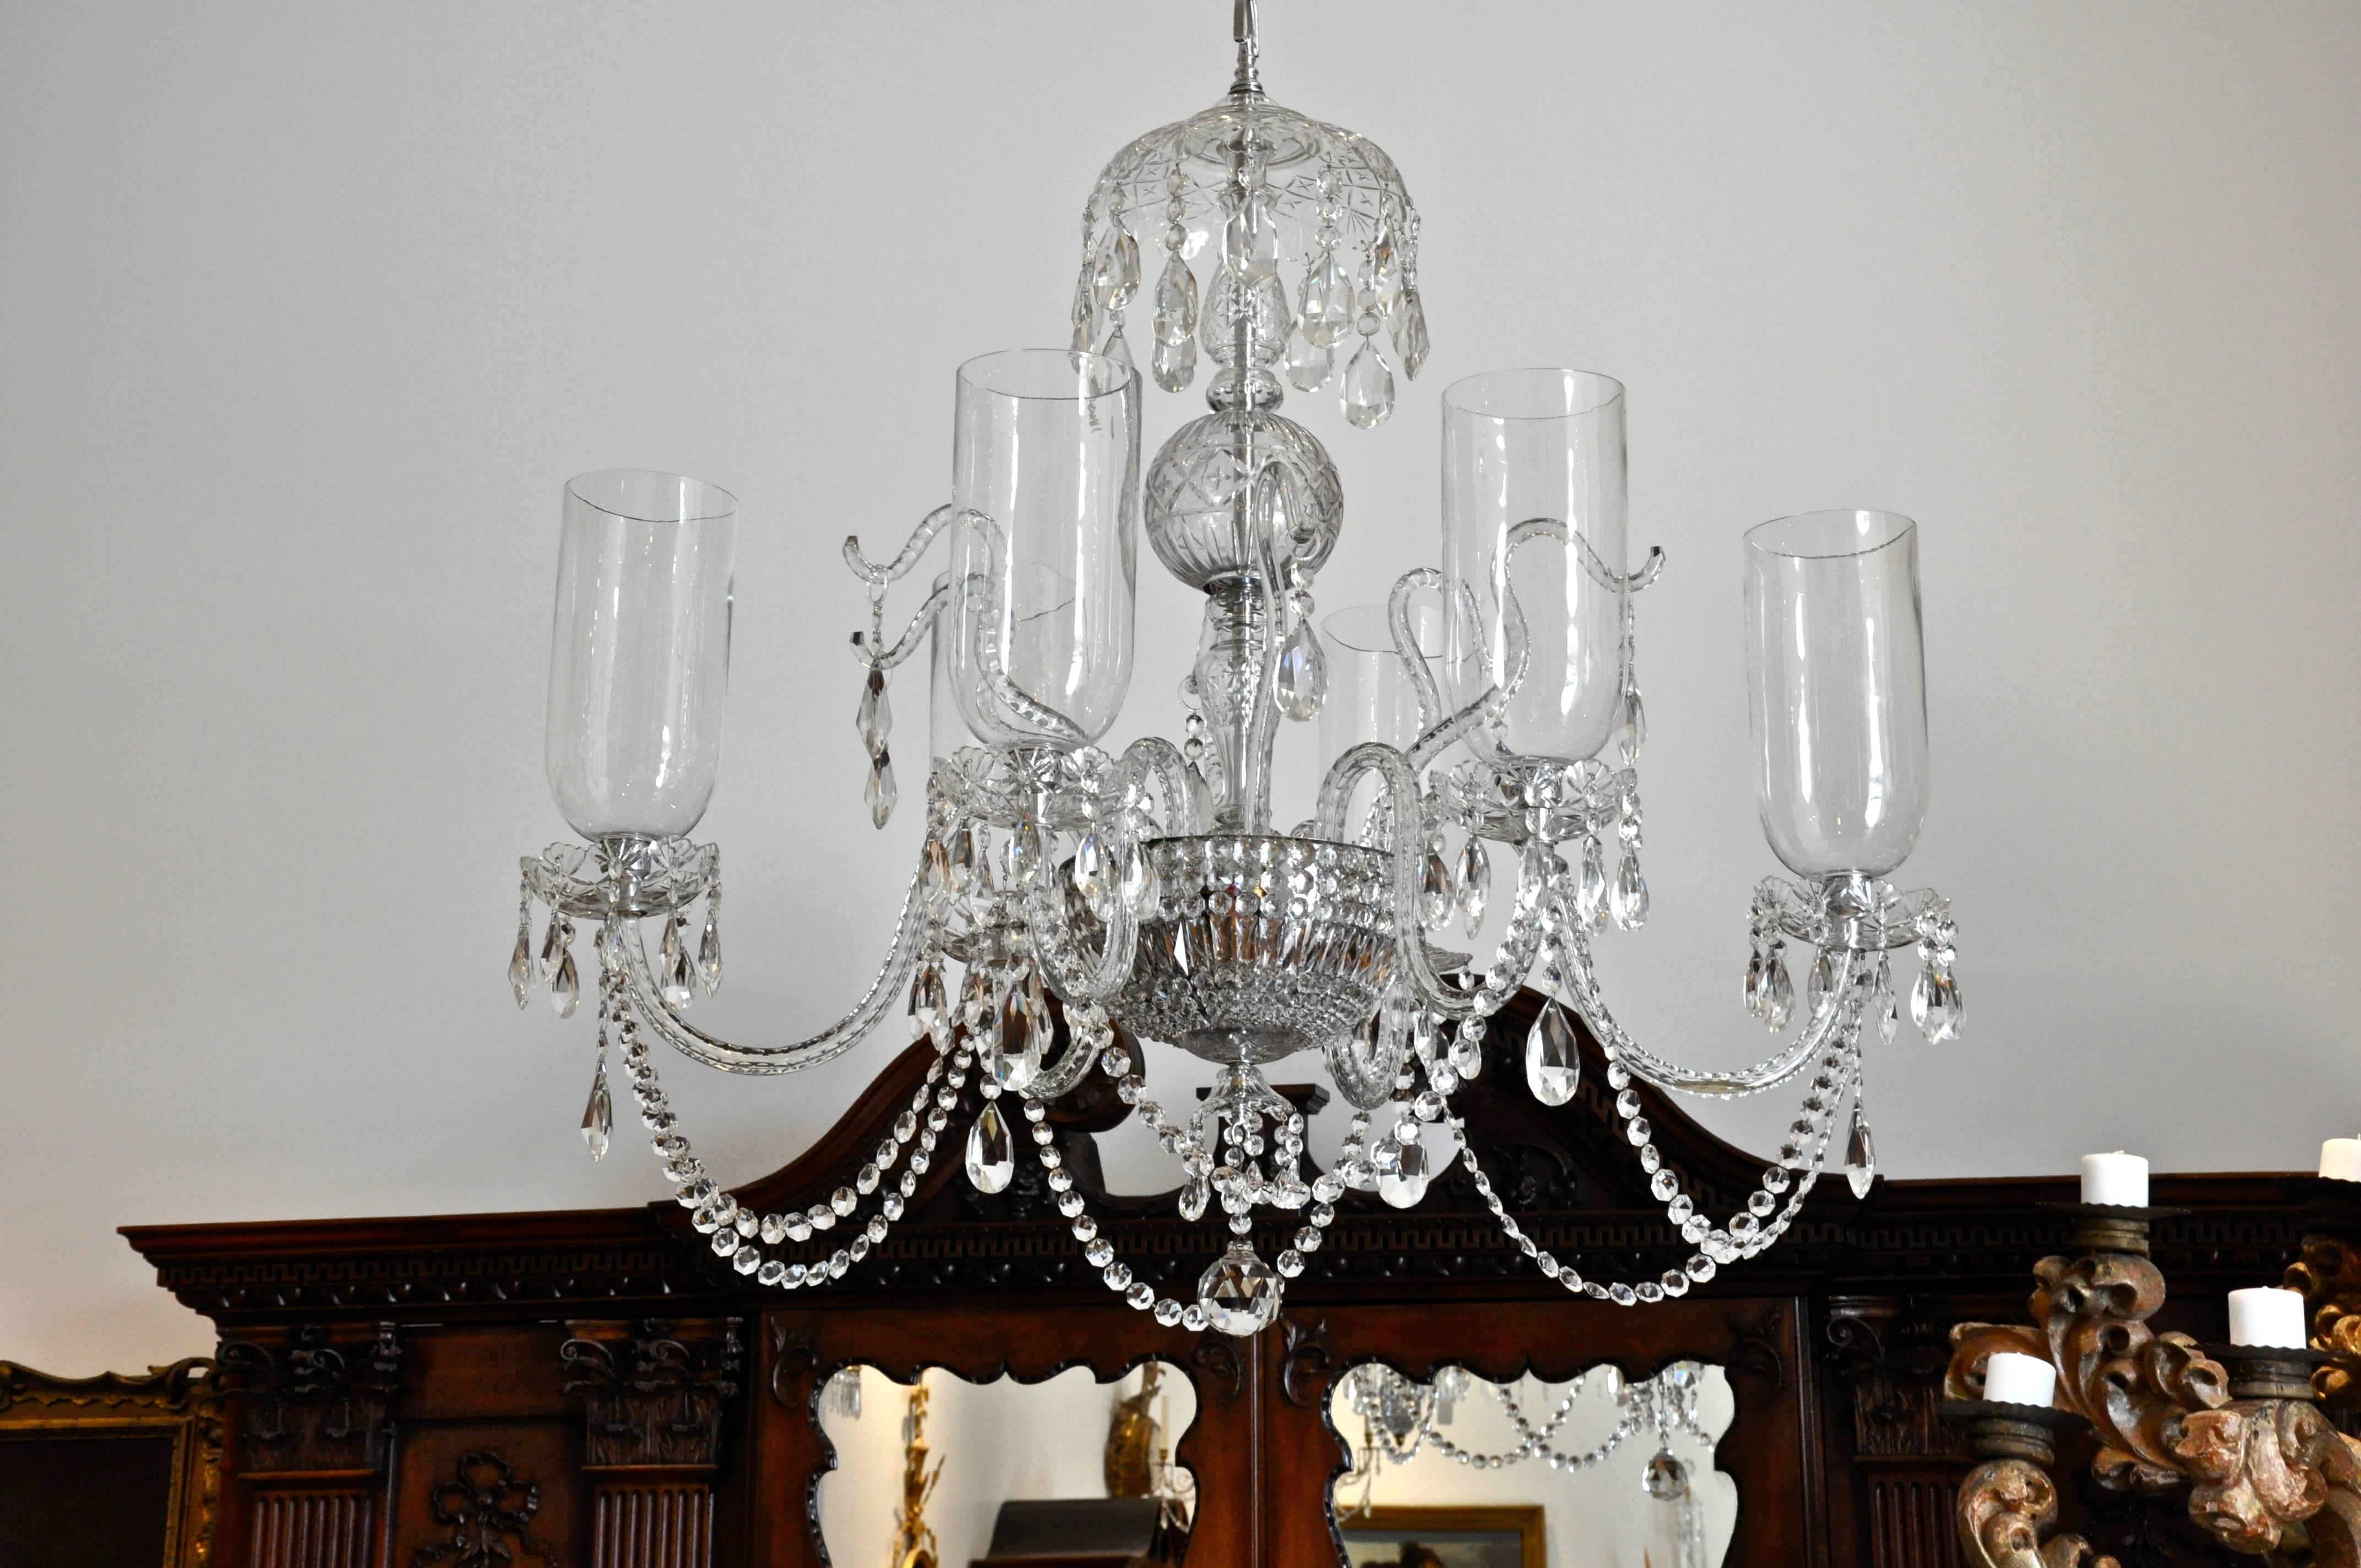 Rare and exquisite pair of Georgian inspired chandeliers of the mid-century modern period

Wonderfully cut crystal
Custom designer created for an exquisite Bedford, New York home in the 1950s
Hollywood Mid-
Century glamour
Original blown glass